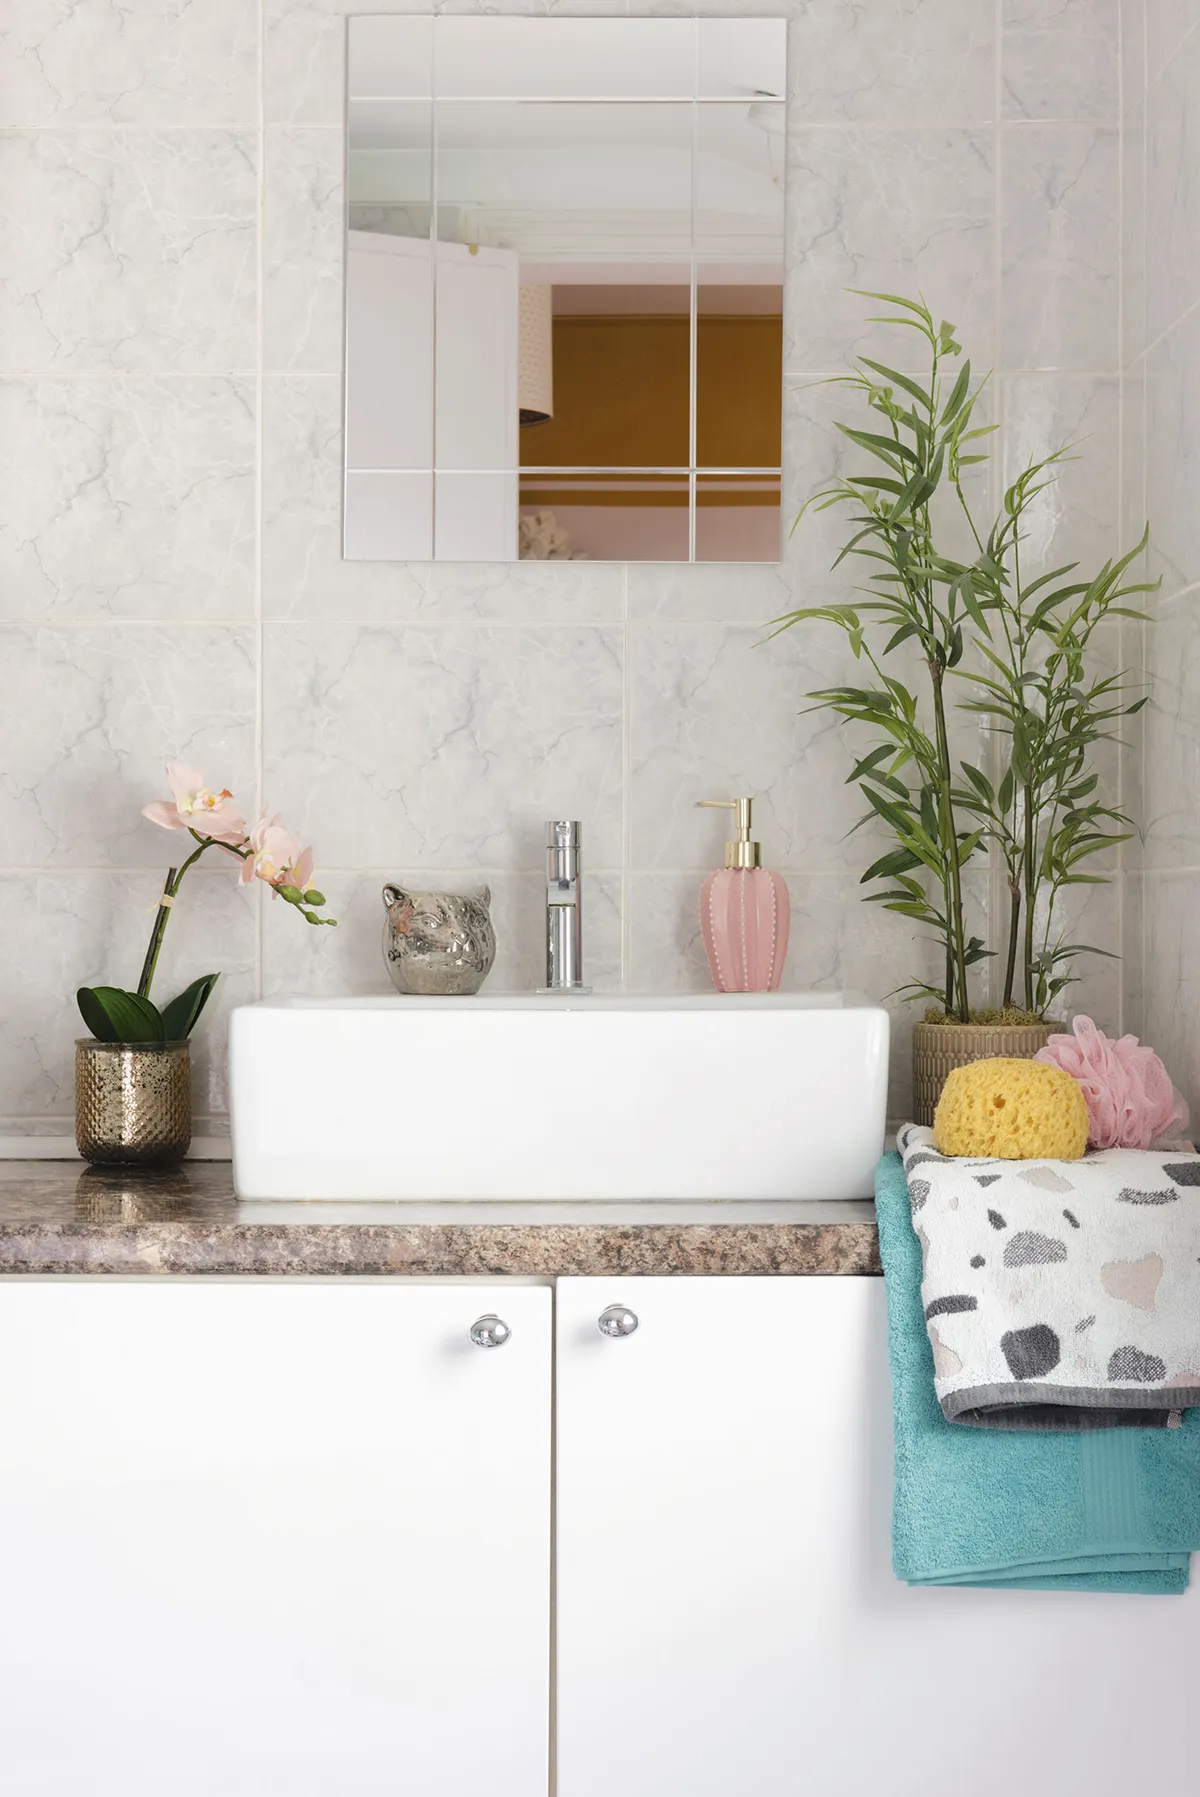 ‘I’ve added a few accessories and faux plants in the bathroom, plus a couple of pictures, to try and add character, but really it needs a complete overhaul, so we need to save up a bit first’